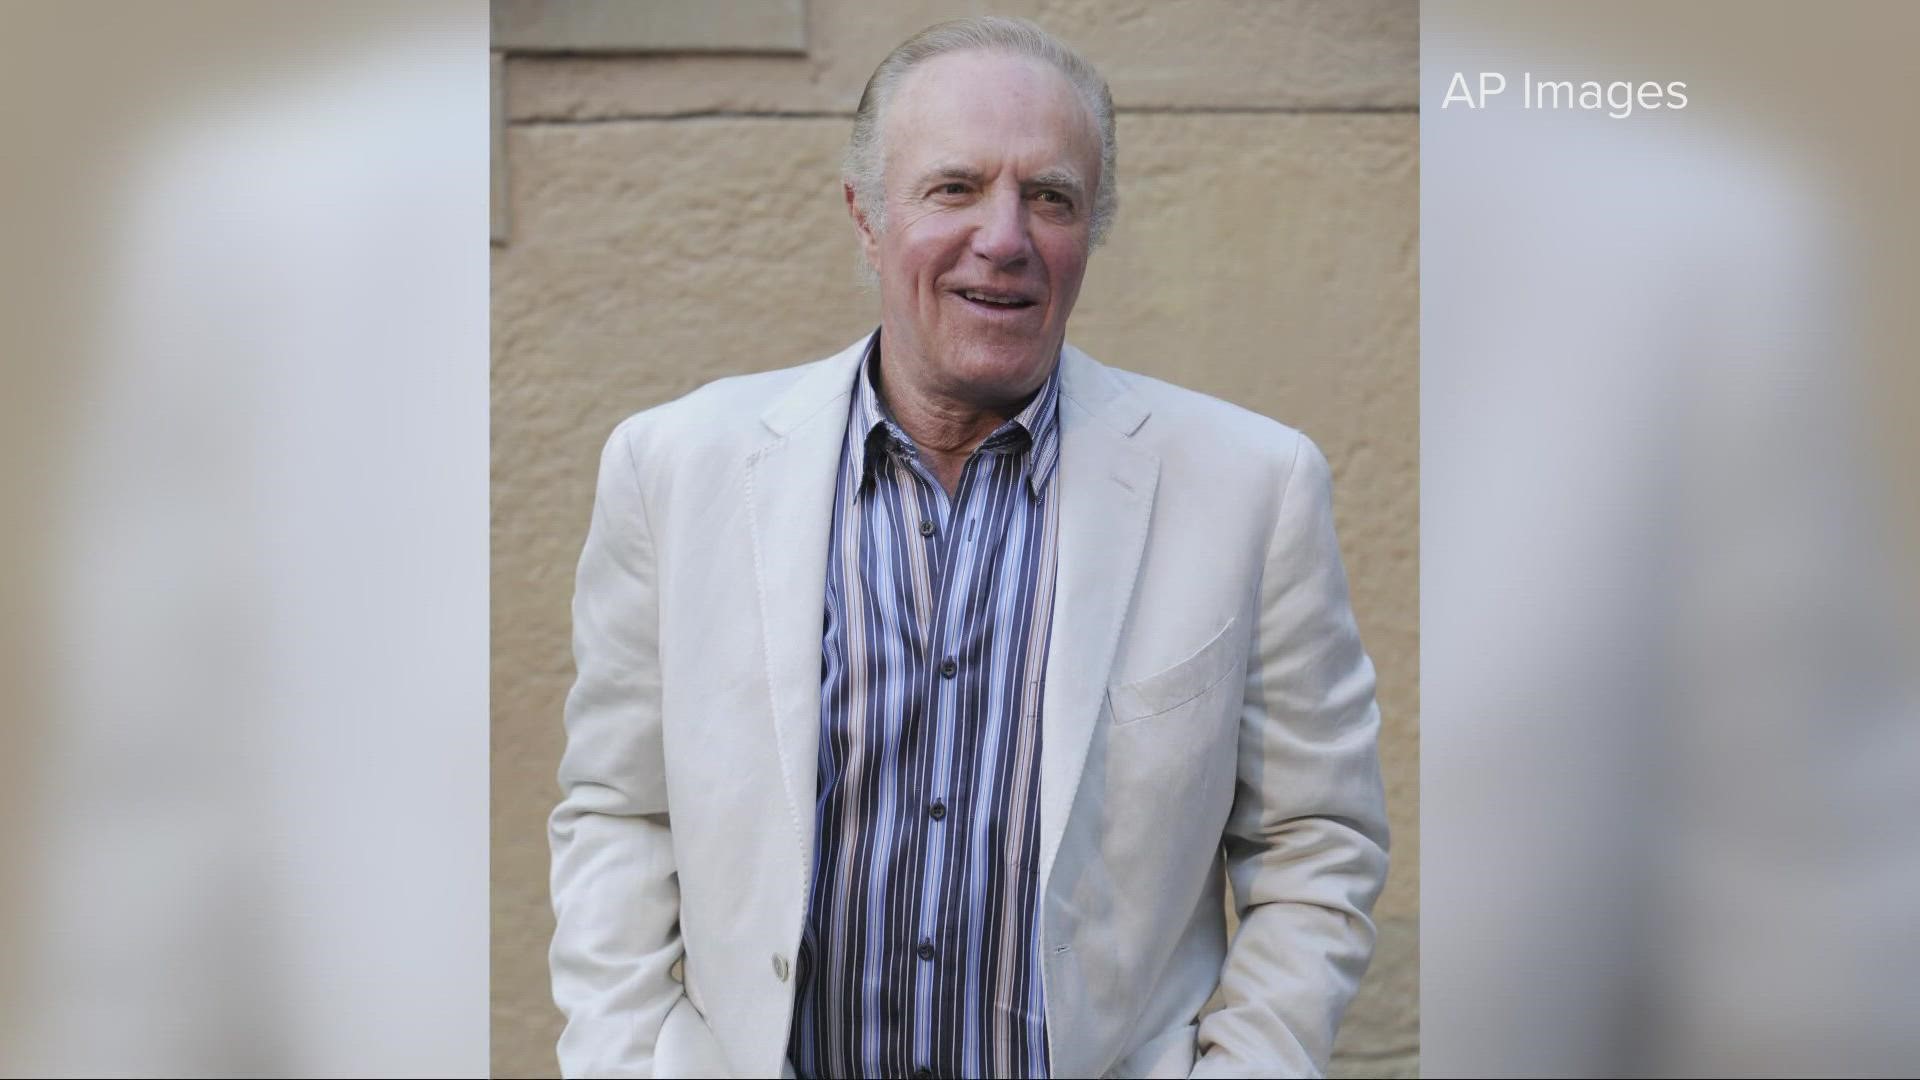 James Caan, known for his roles in "The Godfather," "Misery," "Elf" and "El Dorado," died Wednesday night, according to the 82-year-old actor's Twitter.